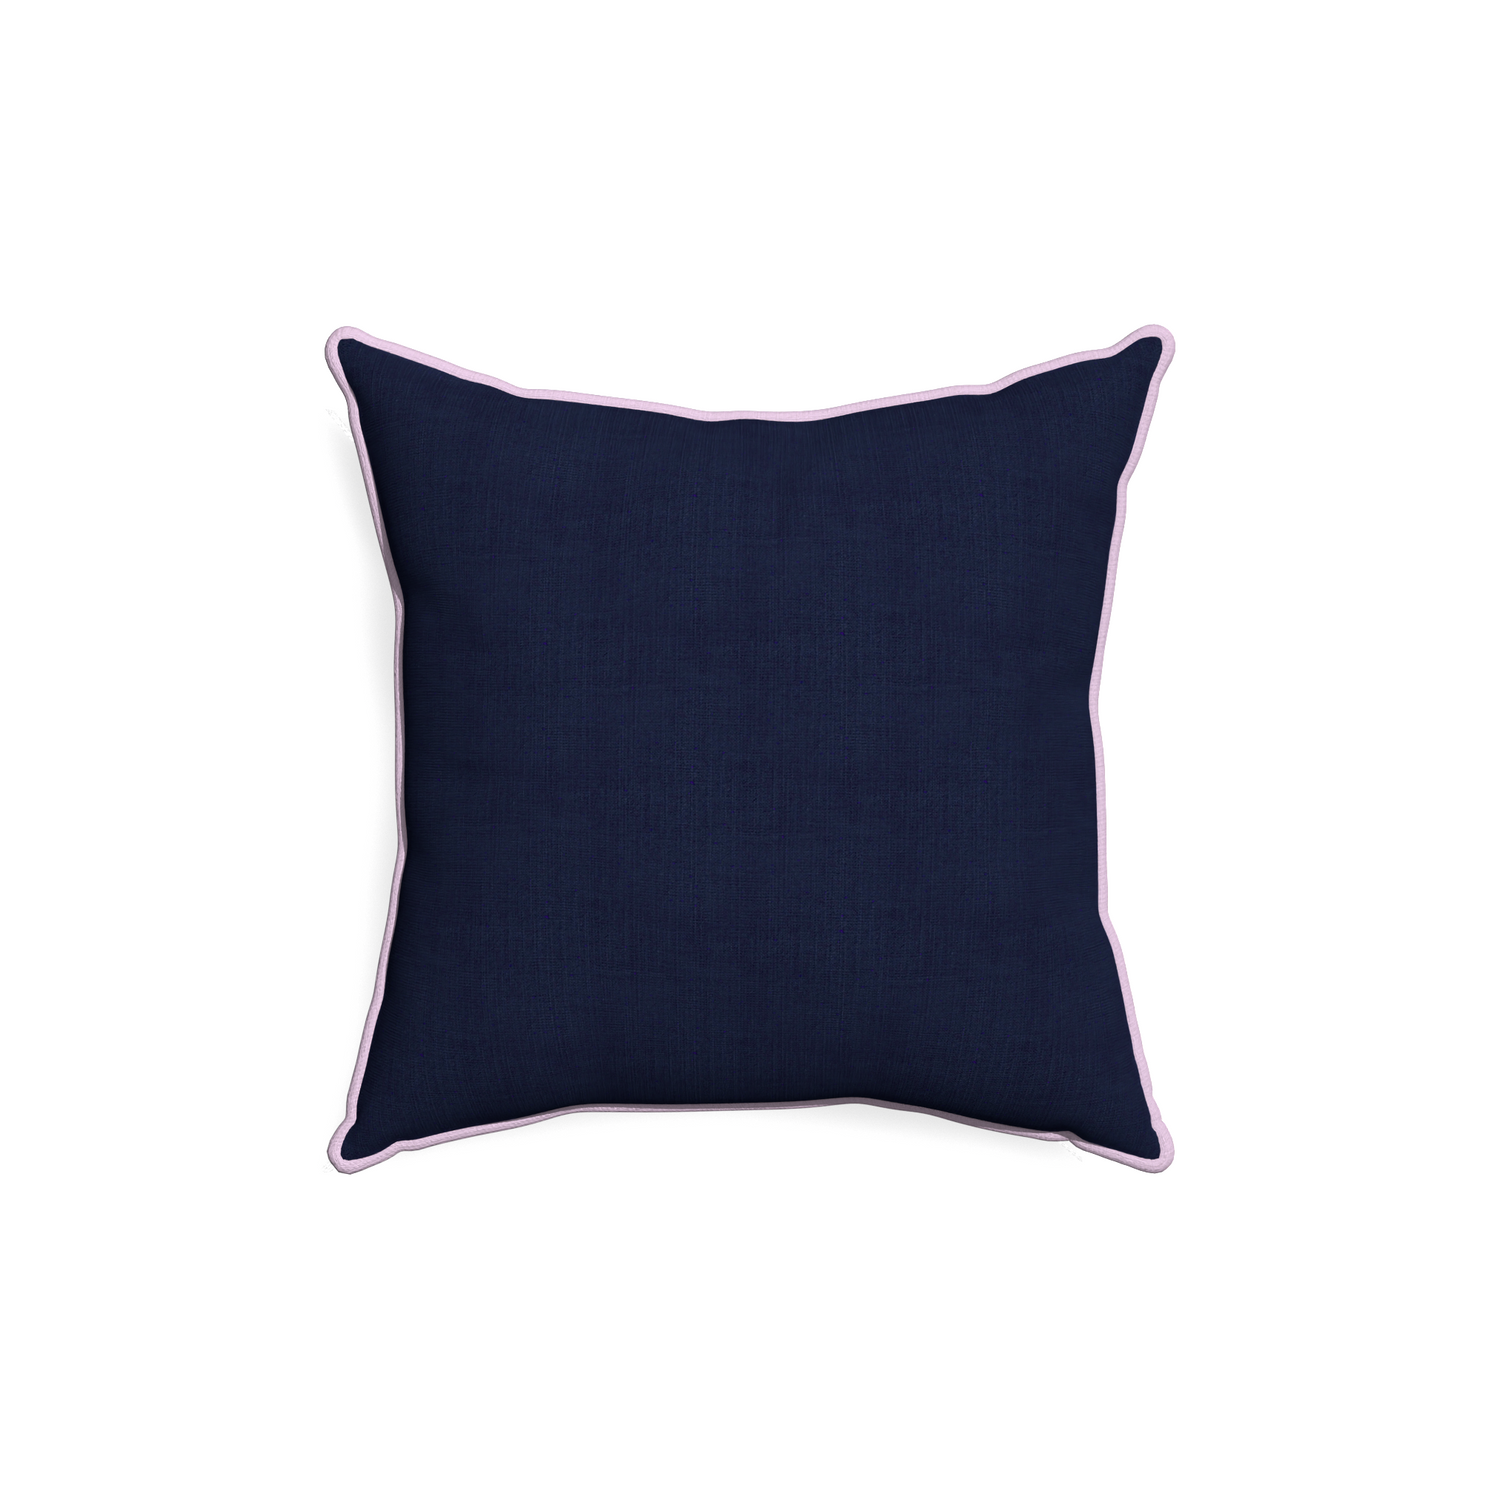 18-square midnight custom pillow with l piping on white background